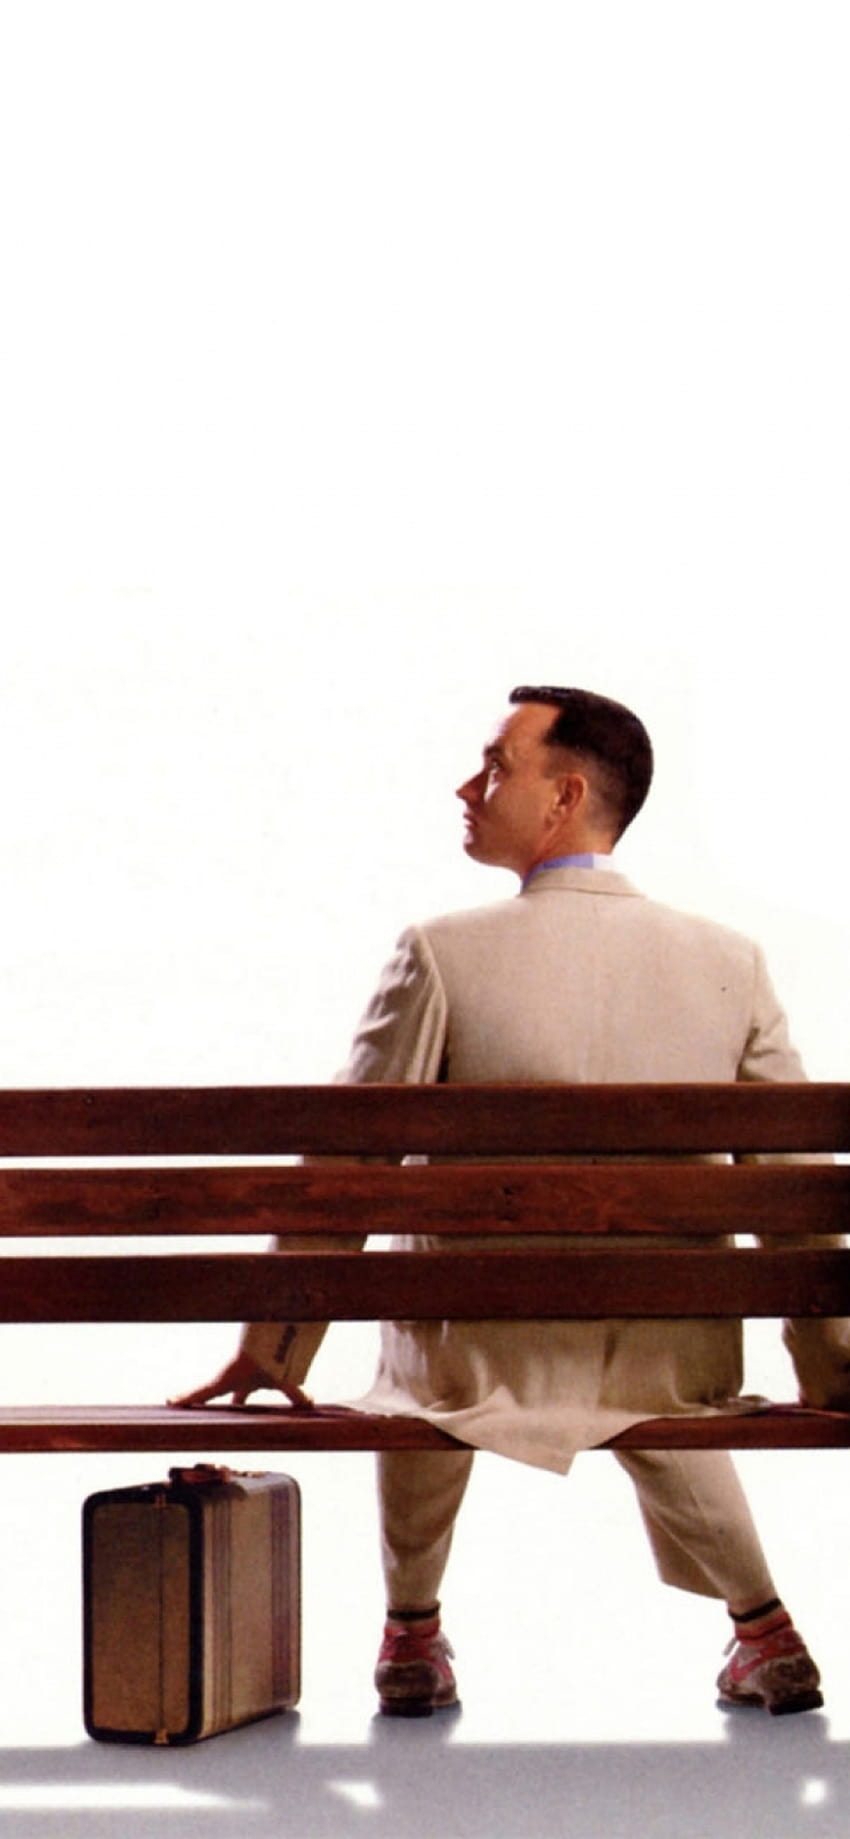 Forrest Gump for iPhone 11 Pro, forrest gump phone HD phone wallpaper